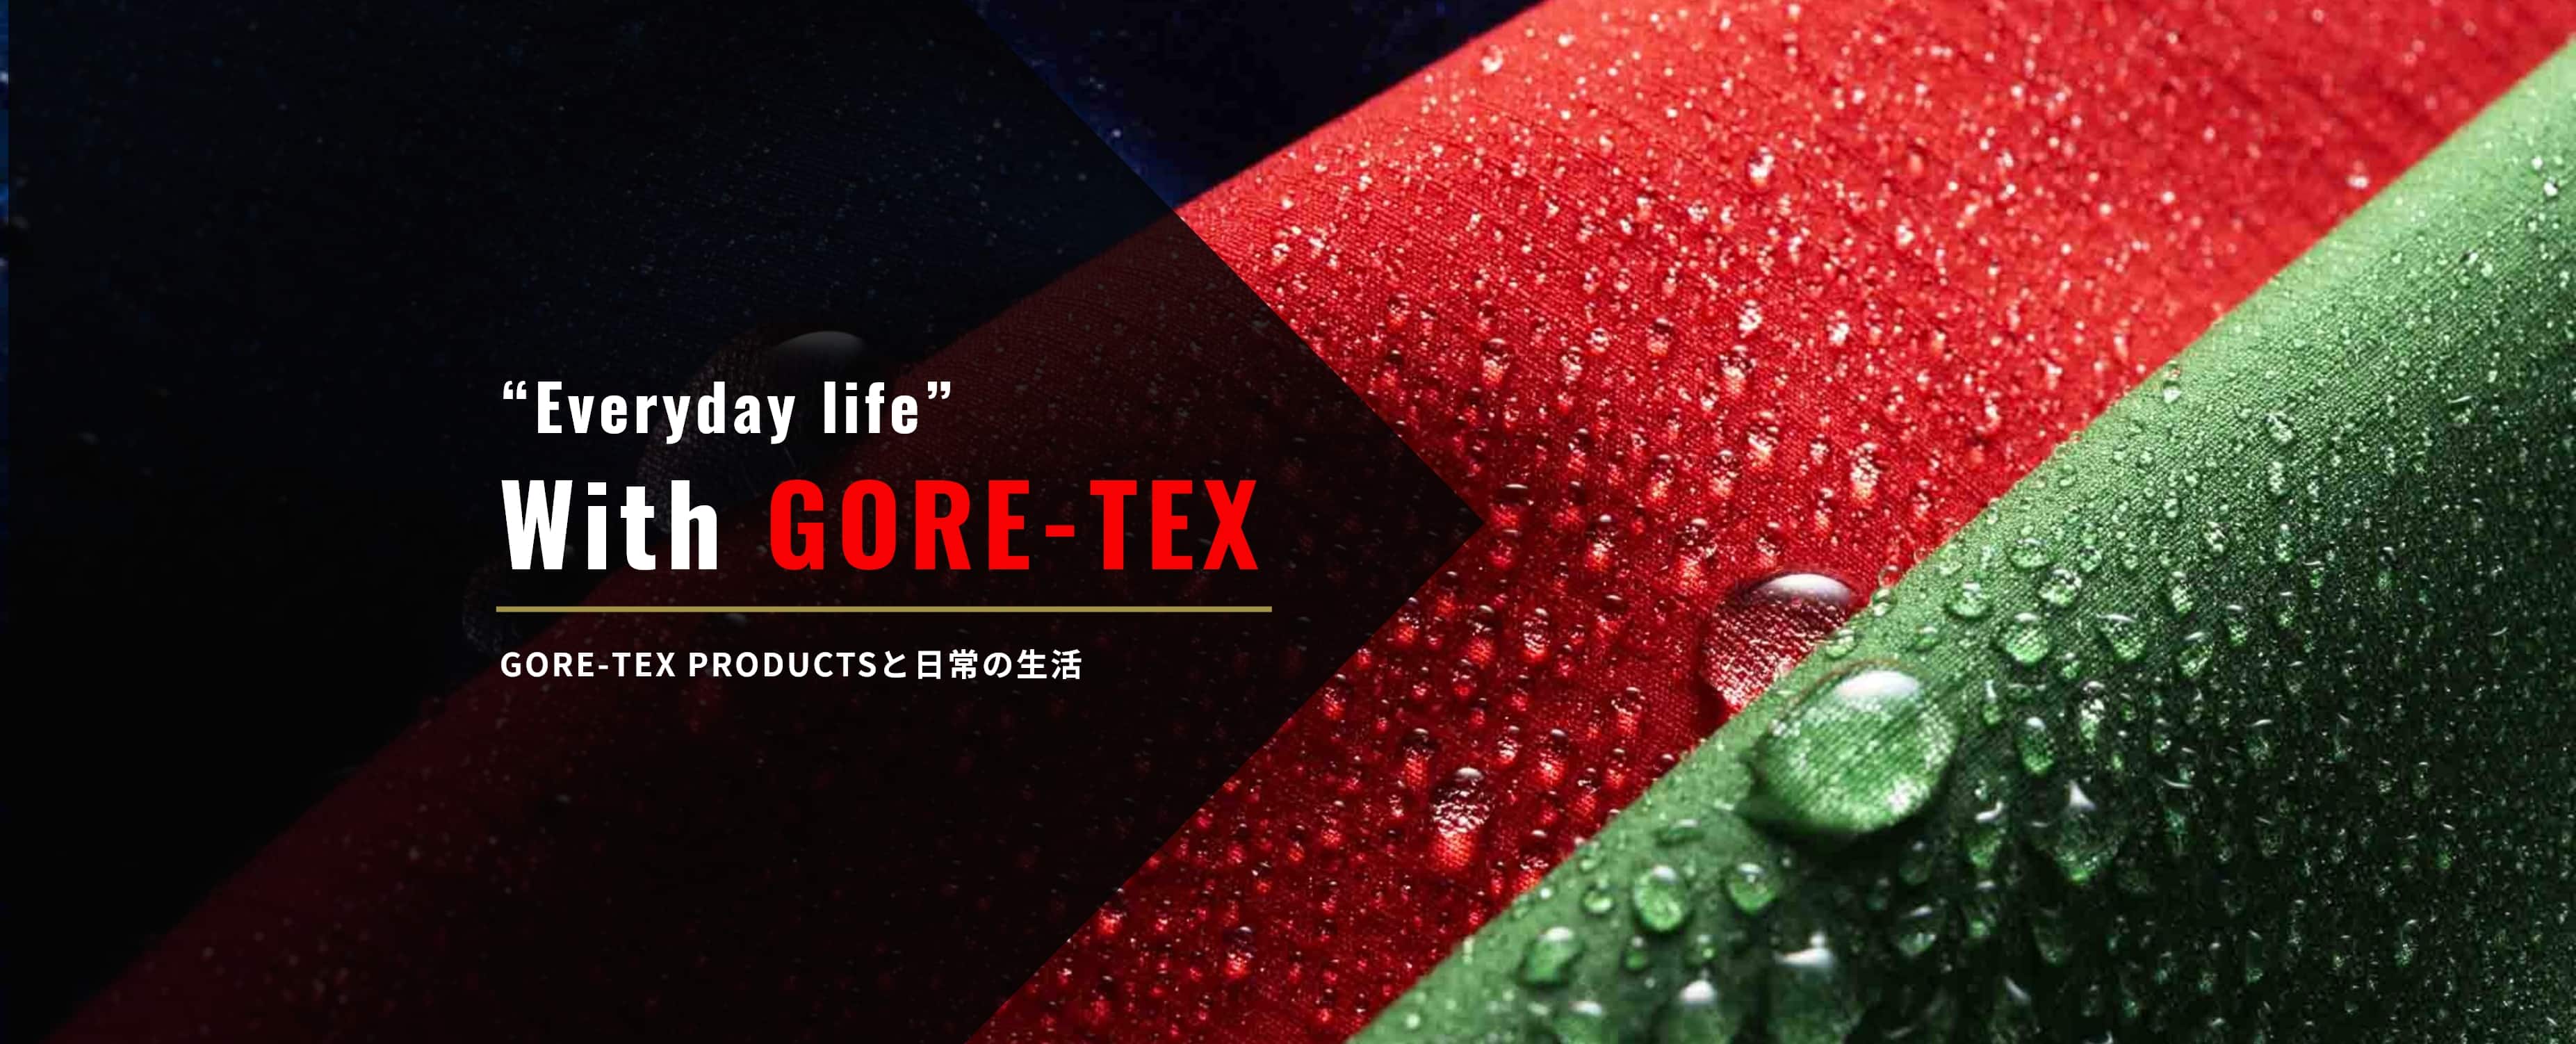 GORE-TEX PRODUCTSと日常の生活 “Everyday life” With GORE-TEX